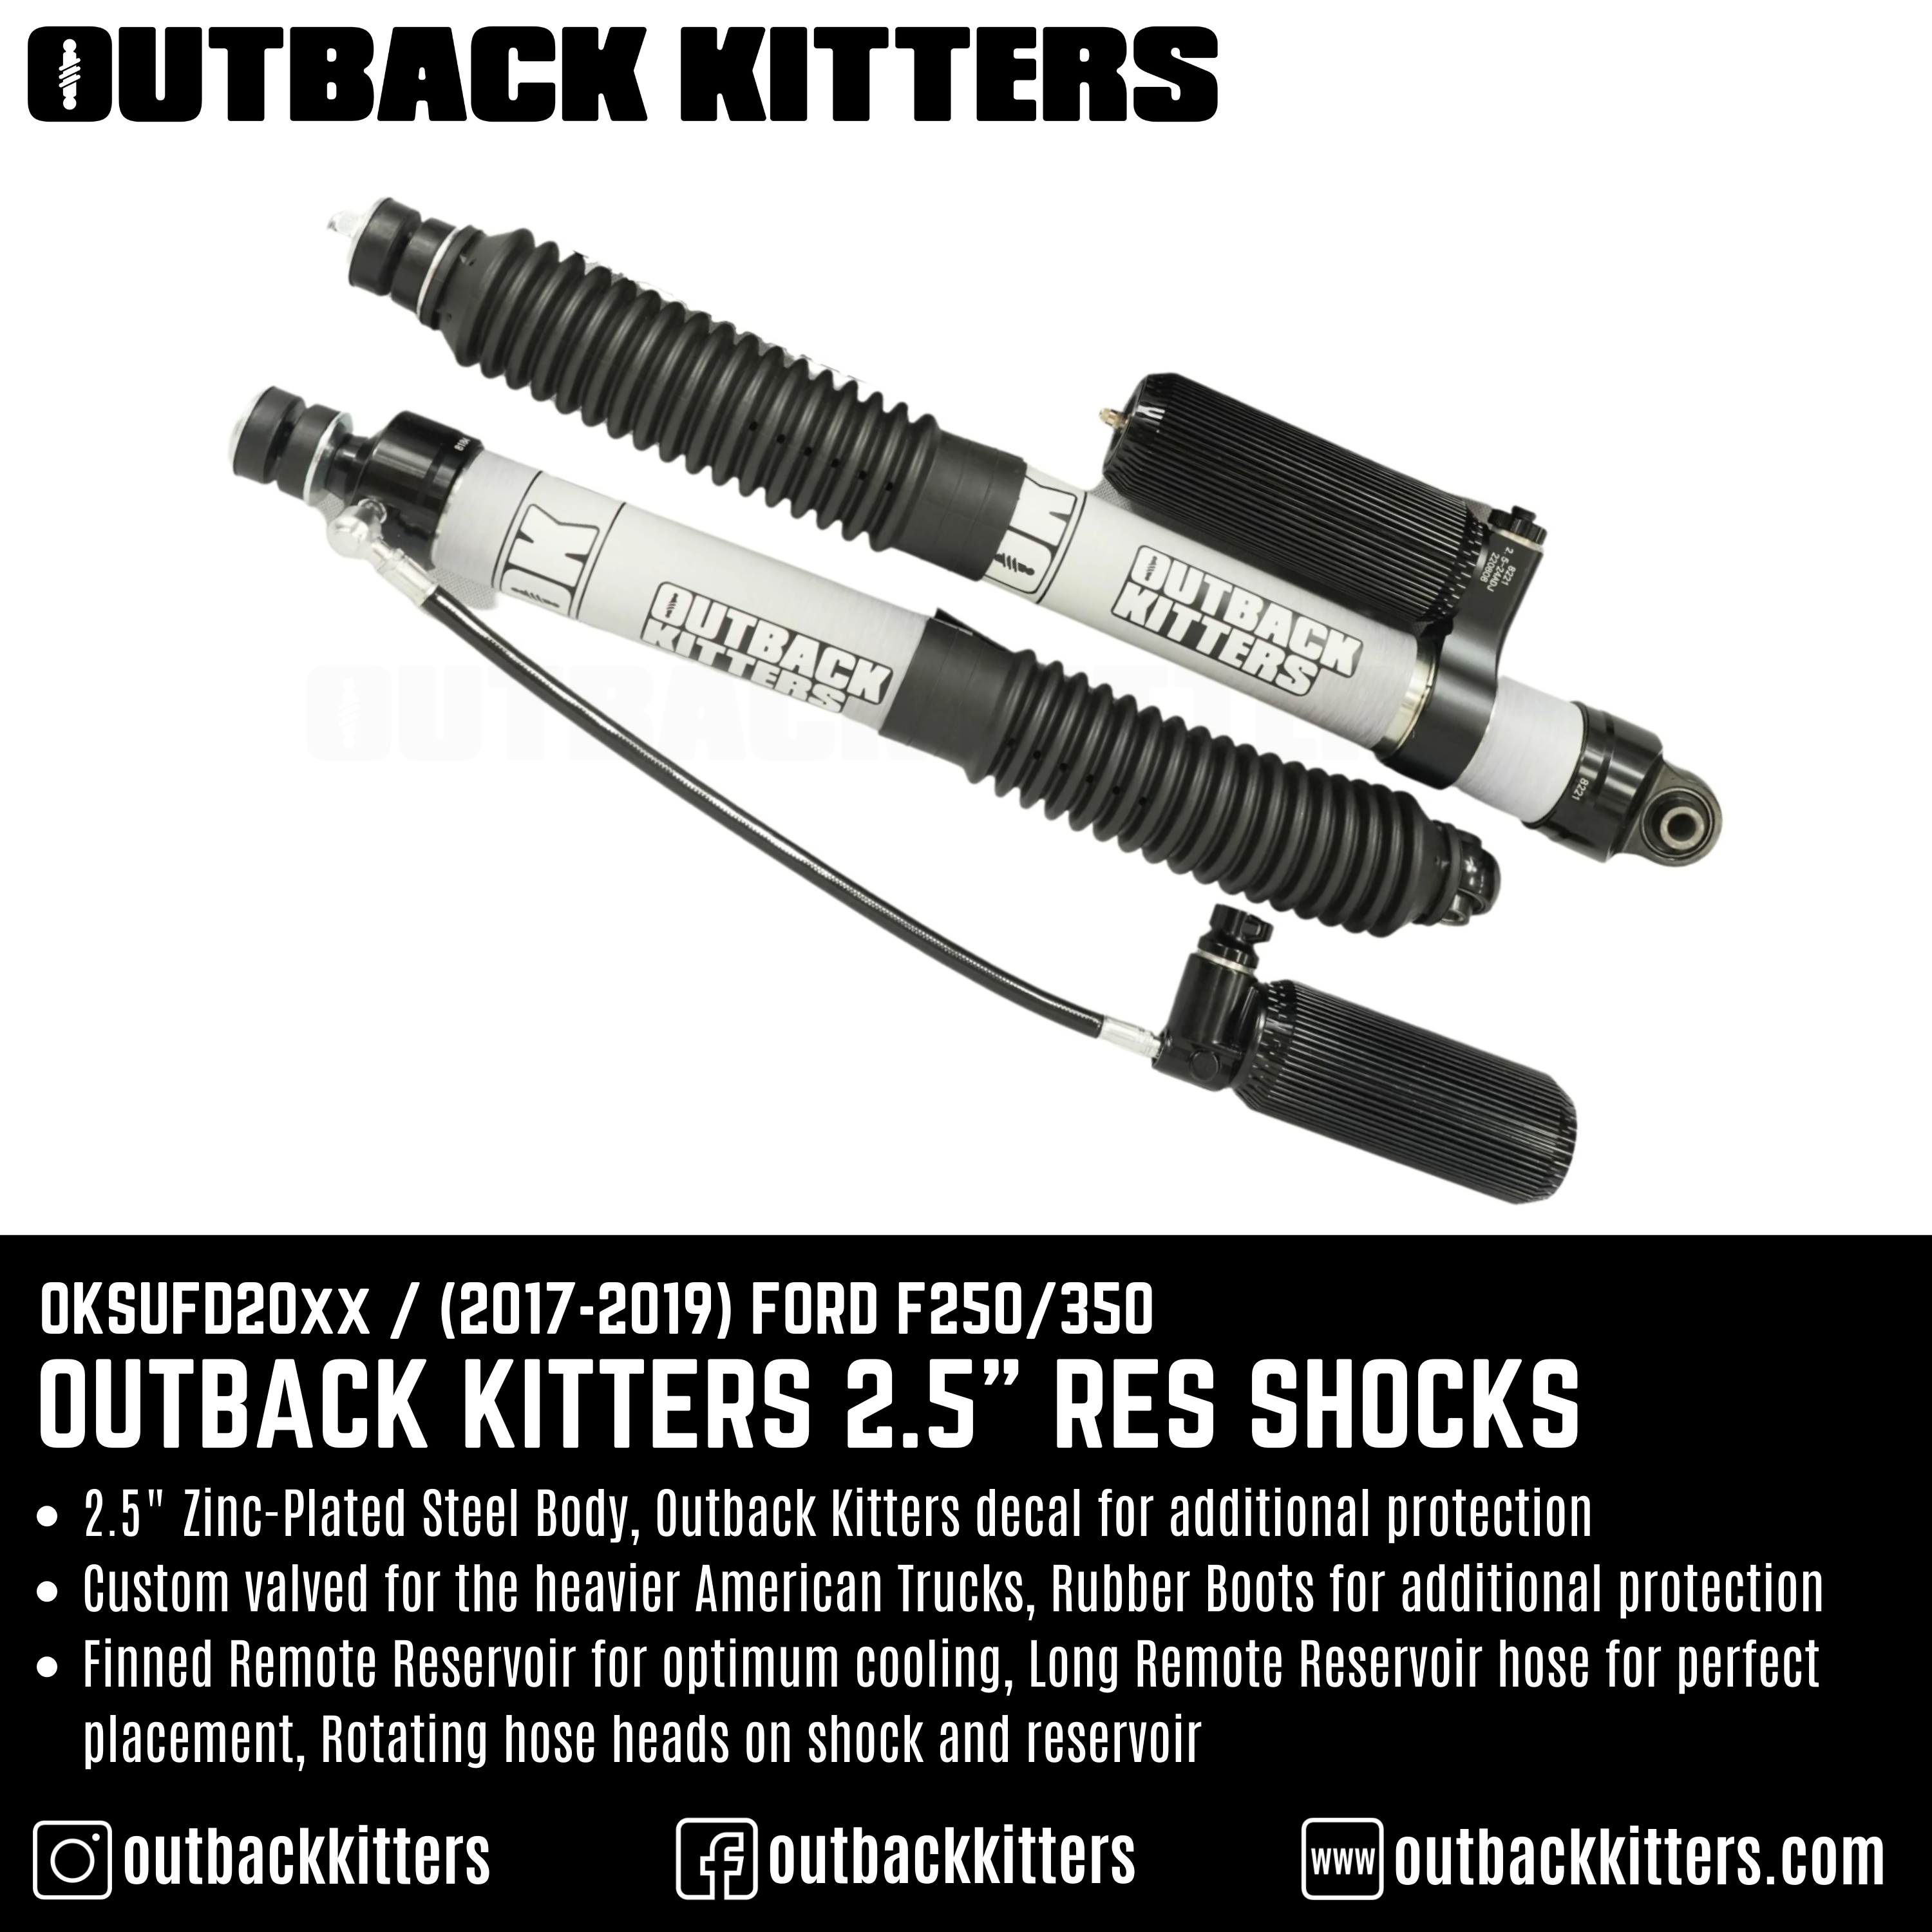 Outback Kitters 2.5" Reservoir Shocks for Ford F250/F350 (2017+) - Outback Kitters